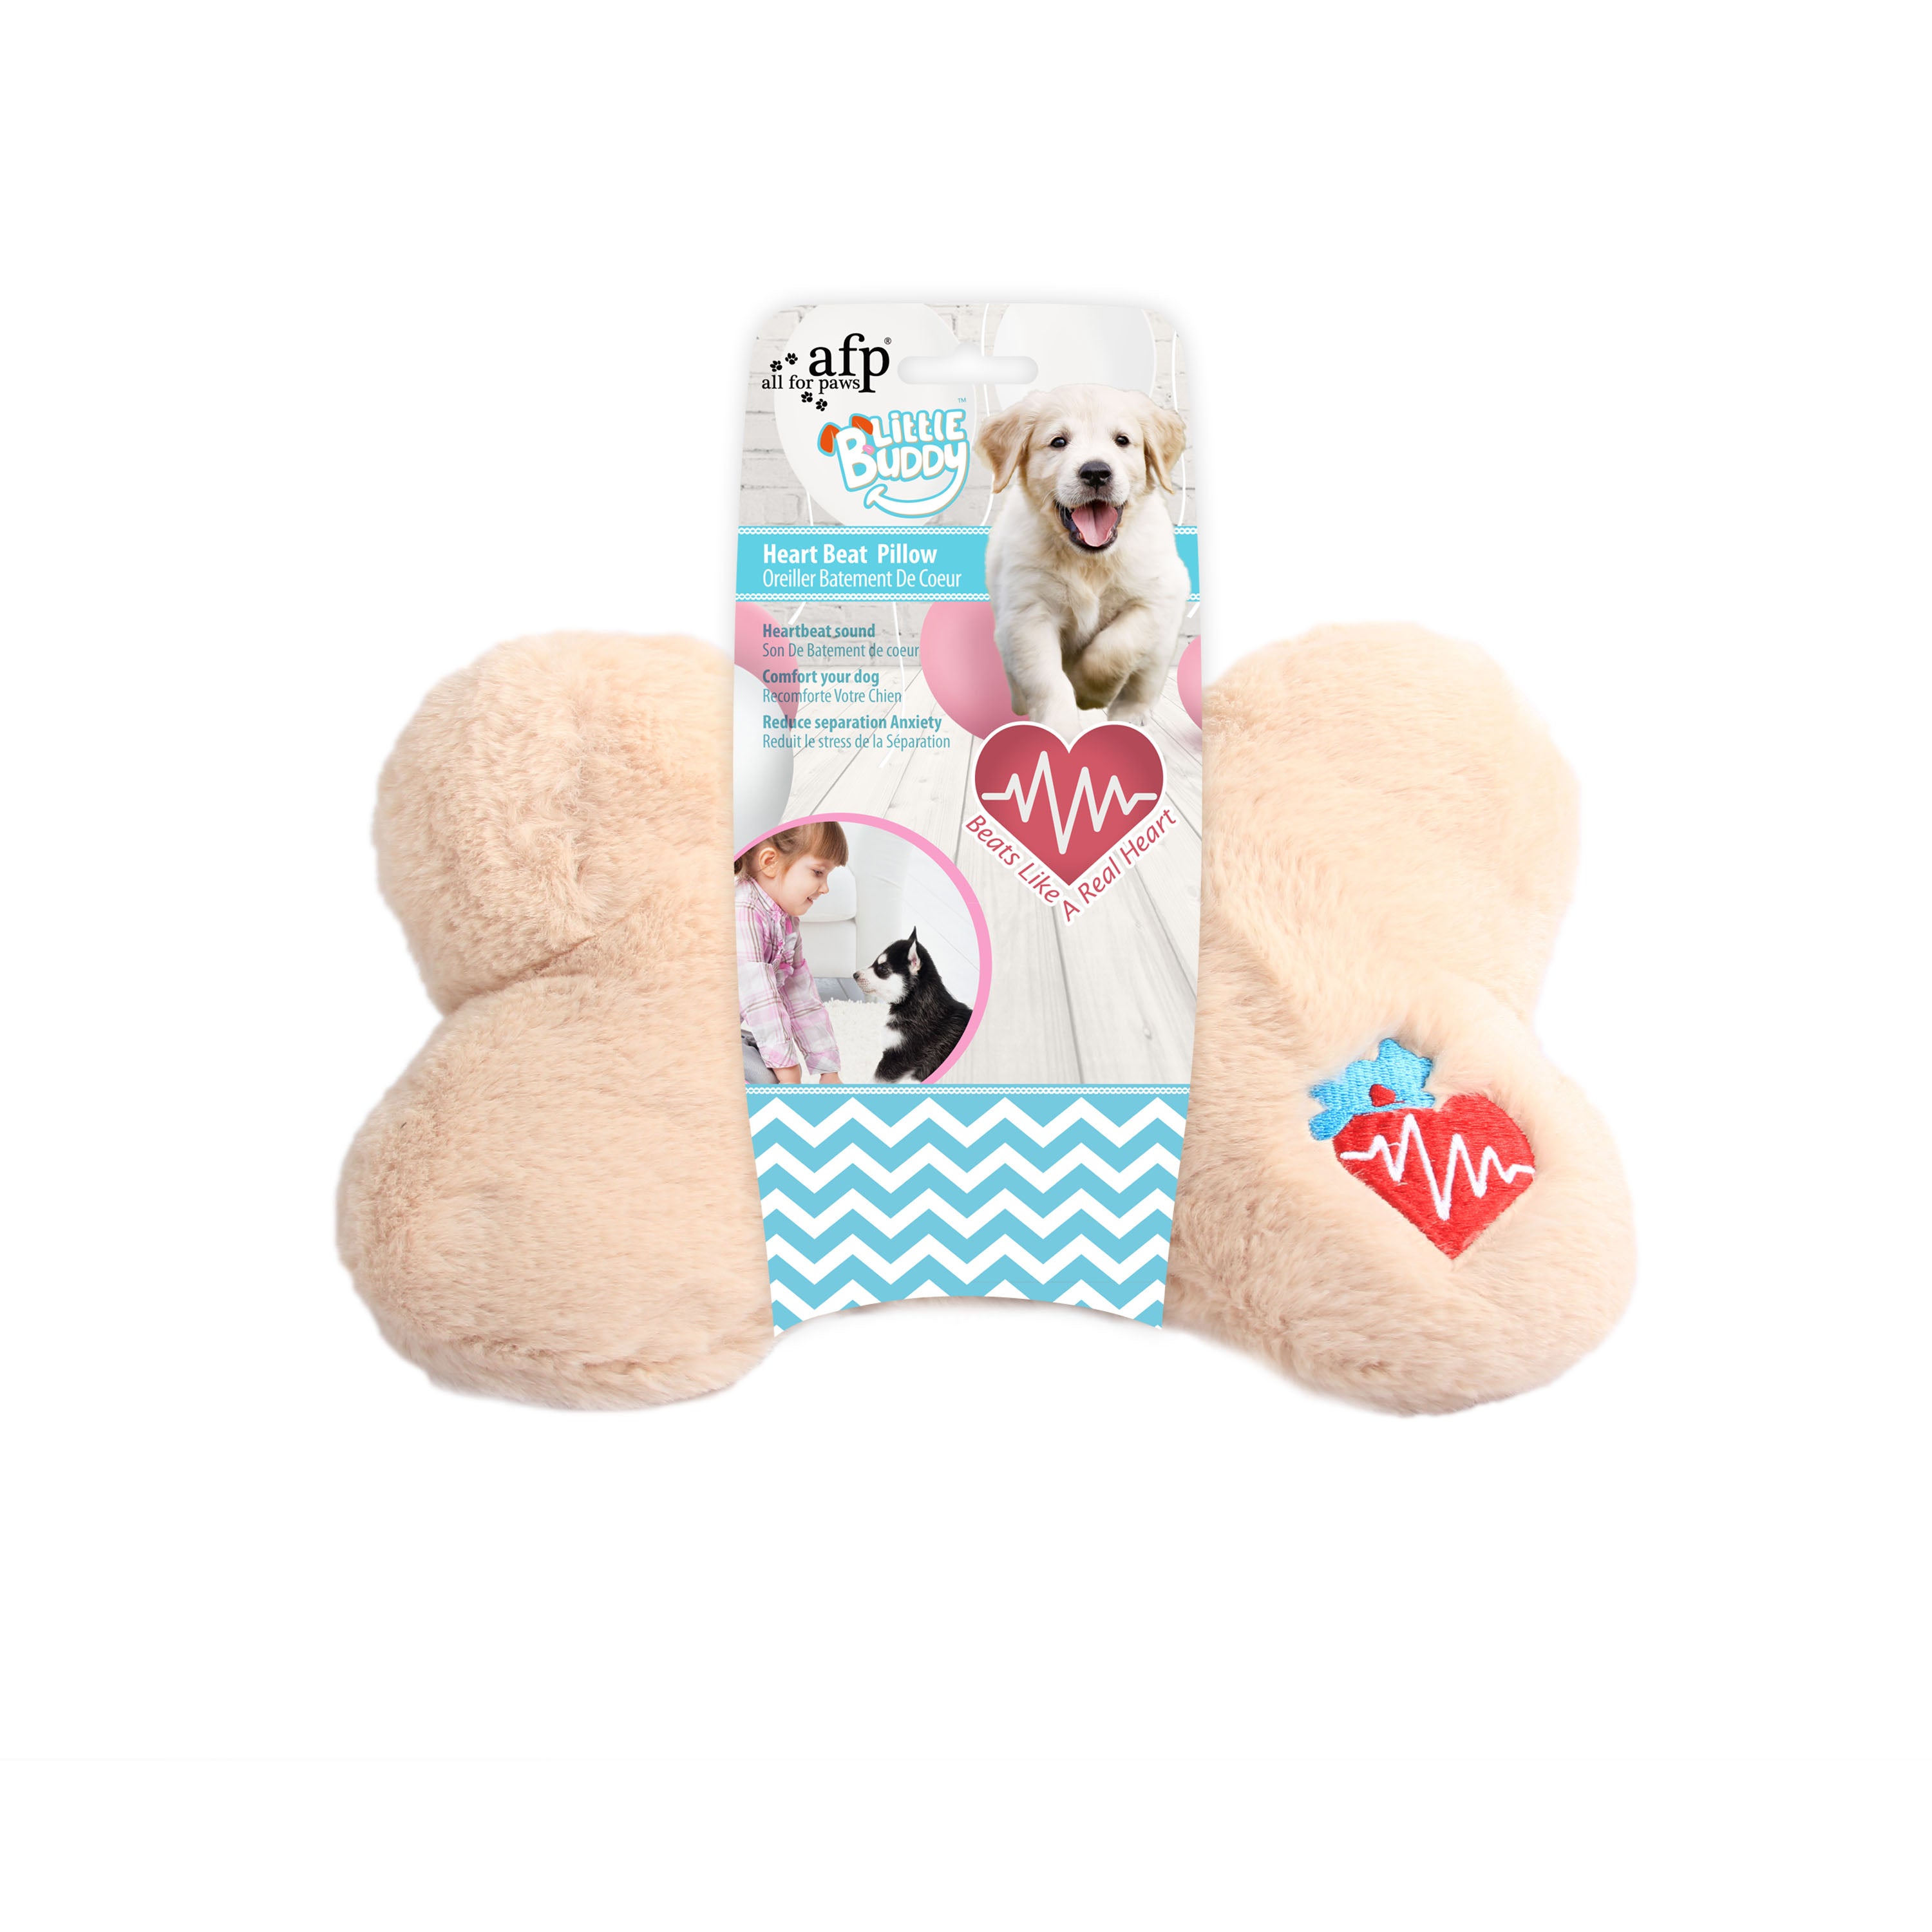 All For Paws Heart Beat Pillow